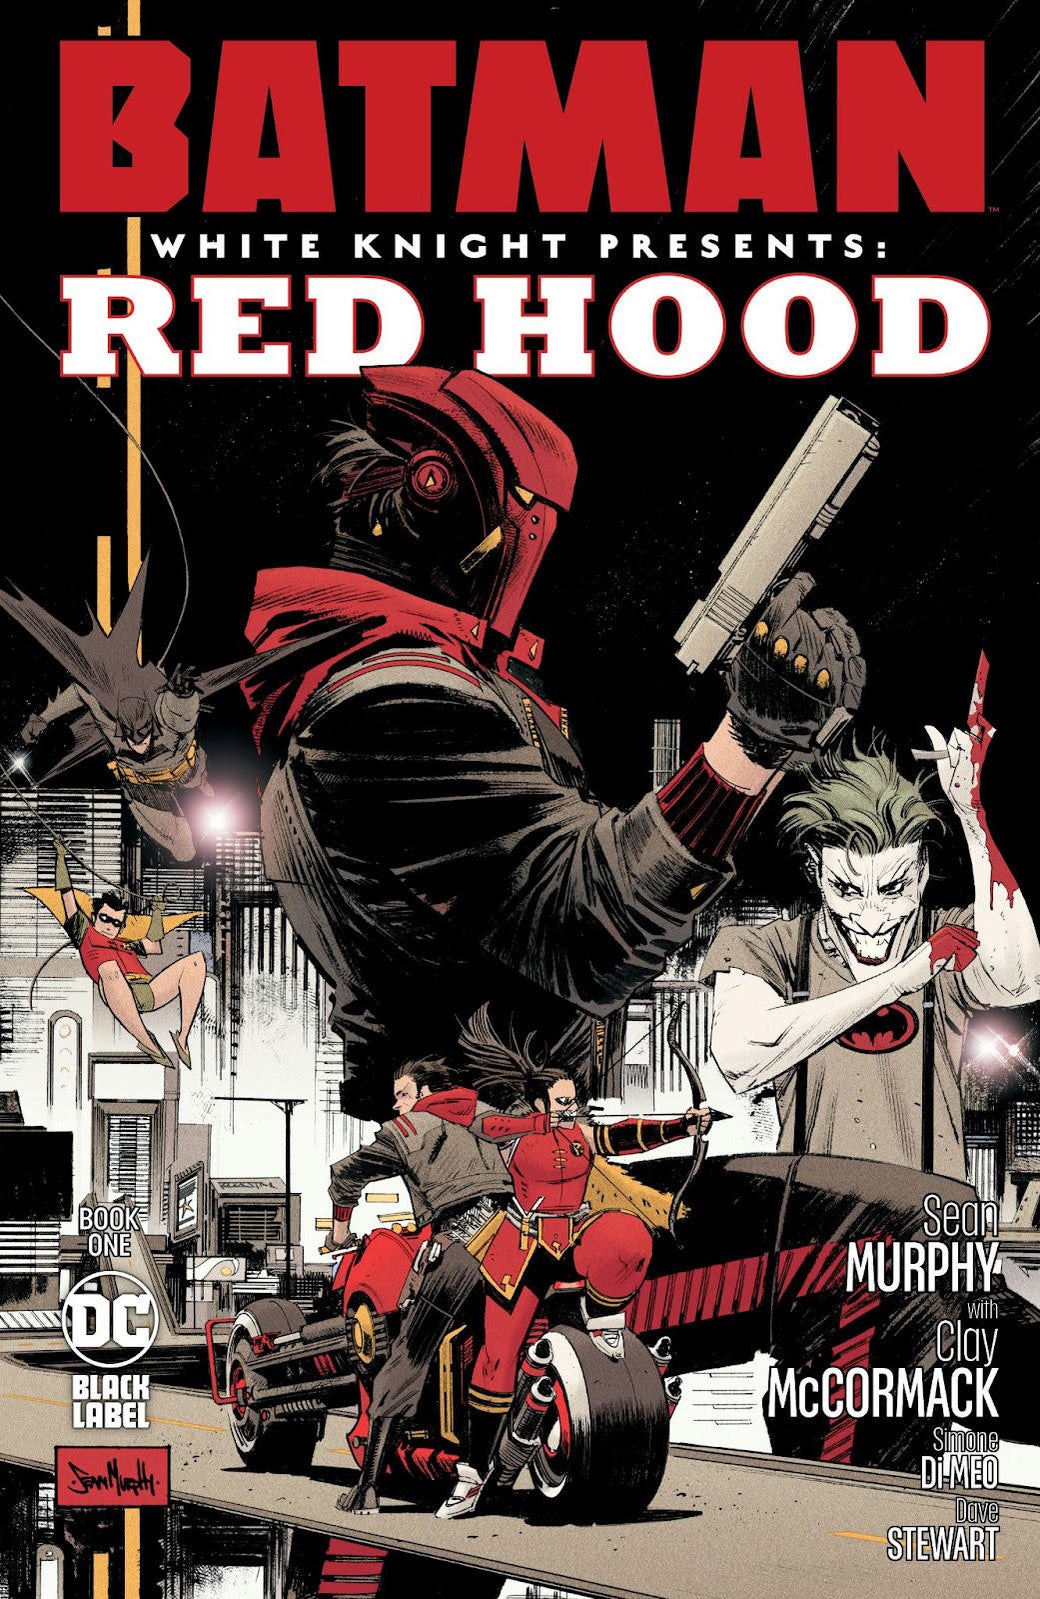 DC Reveals First Look at Batman: White Knight Presents: Red Hood